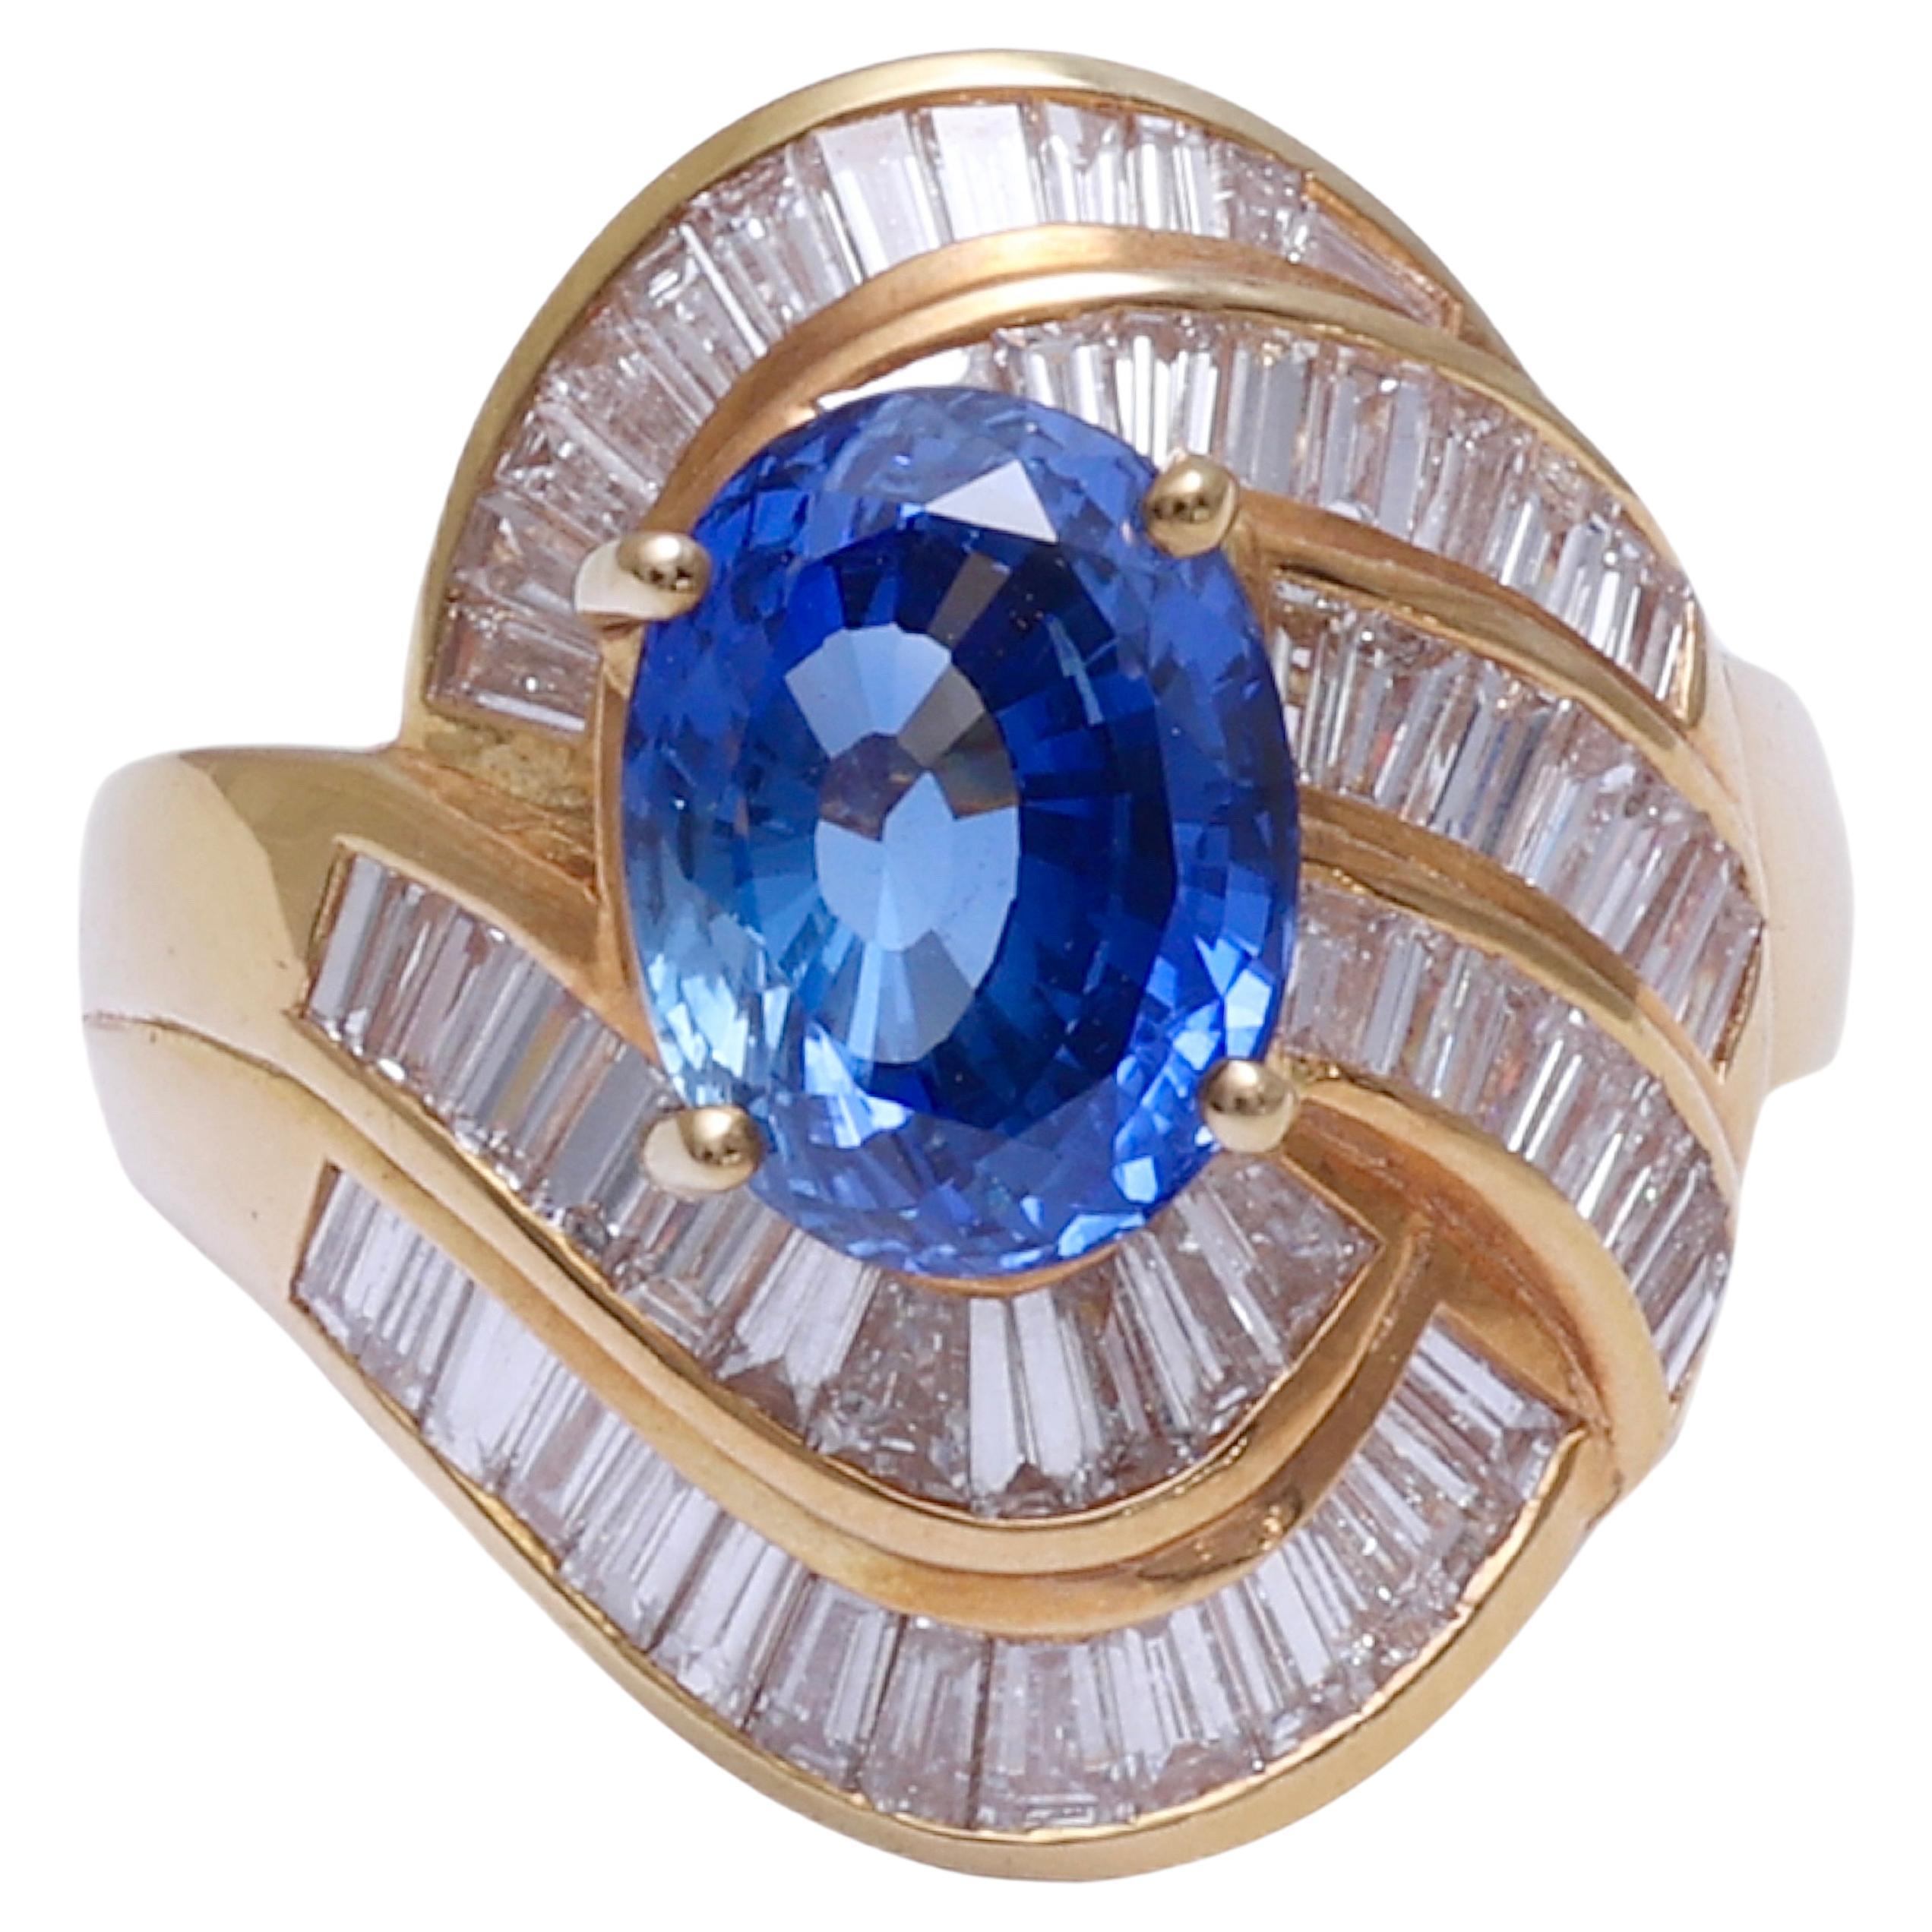 Unique and Luxurious 18 kt. Gold Ring With 3.5 ct. Ceylon Sapphire and Baguette Cut Diamonds

Diamonds: Baguette cut diamonds, together 1.95 ct.

Sapphire: Blue Ceylon sapphire 3.5 ct.

Material: 18 kt yellow gold

Ring size: 53 EU / 6.5 US ( ring